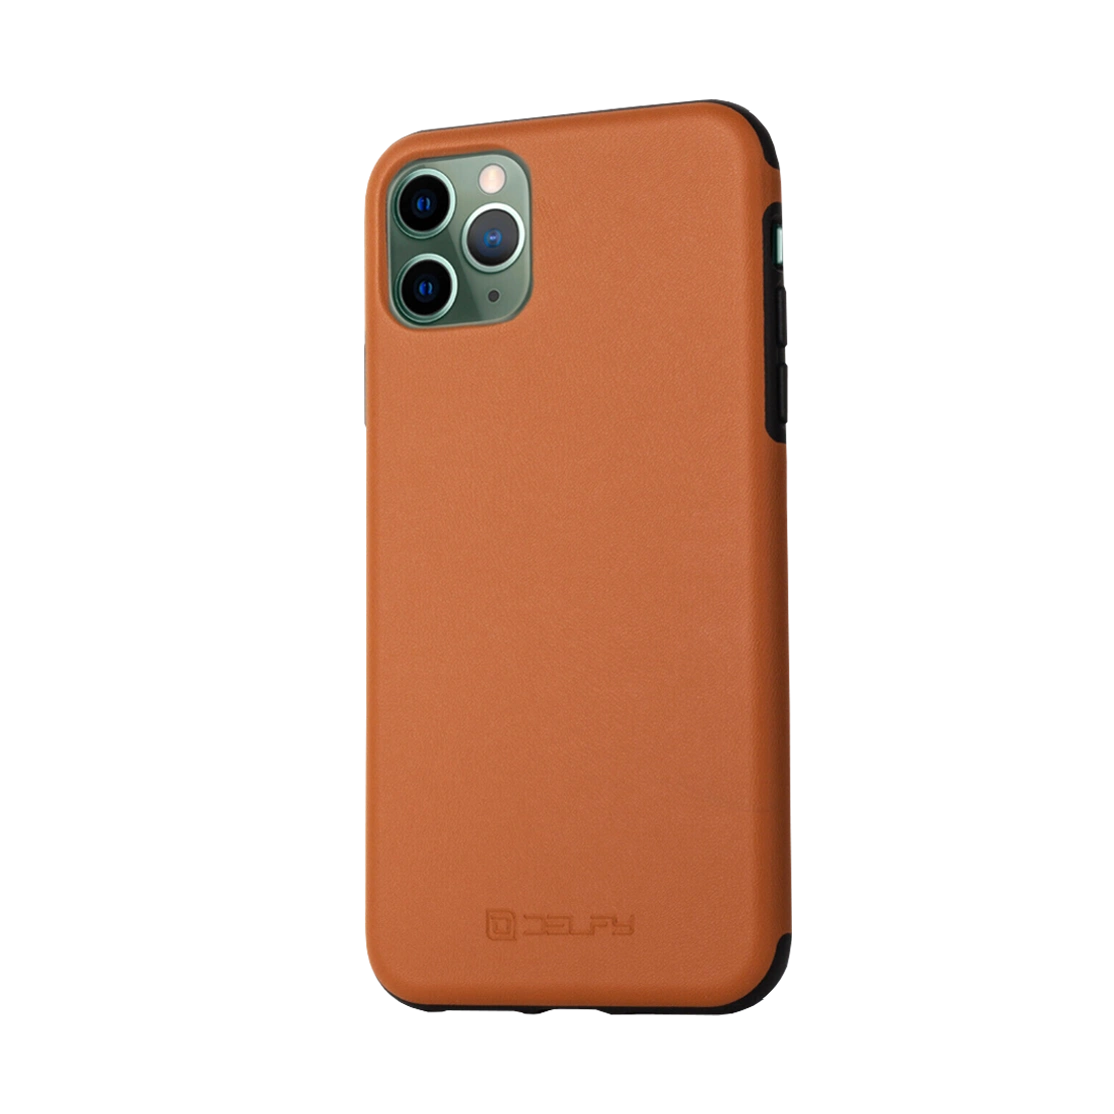 Delfy Derma Case for iPhone 11 Pro Max